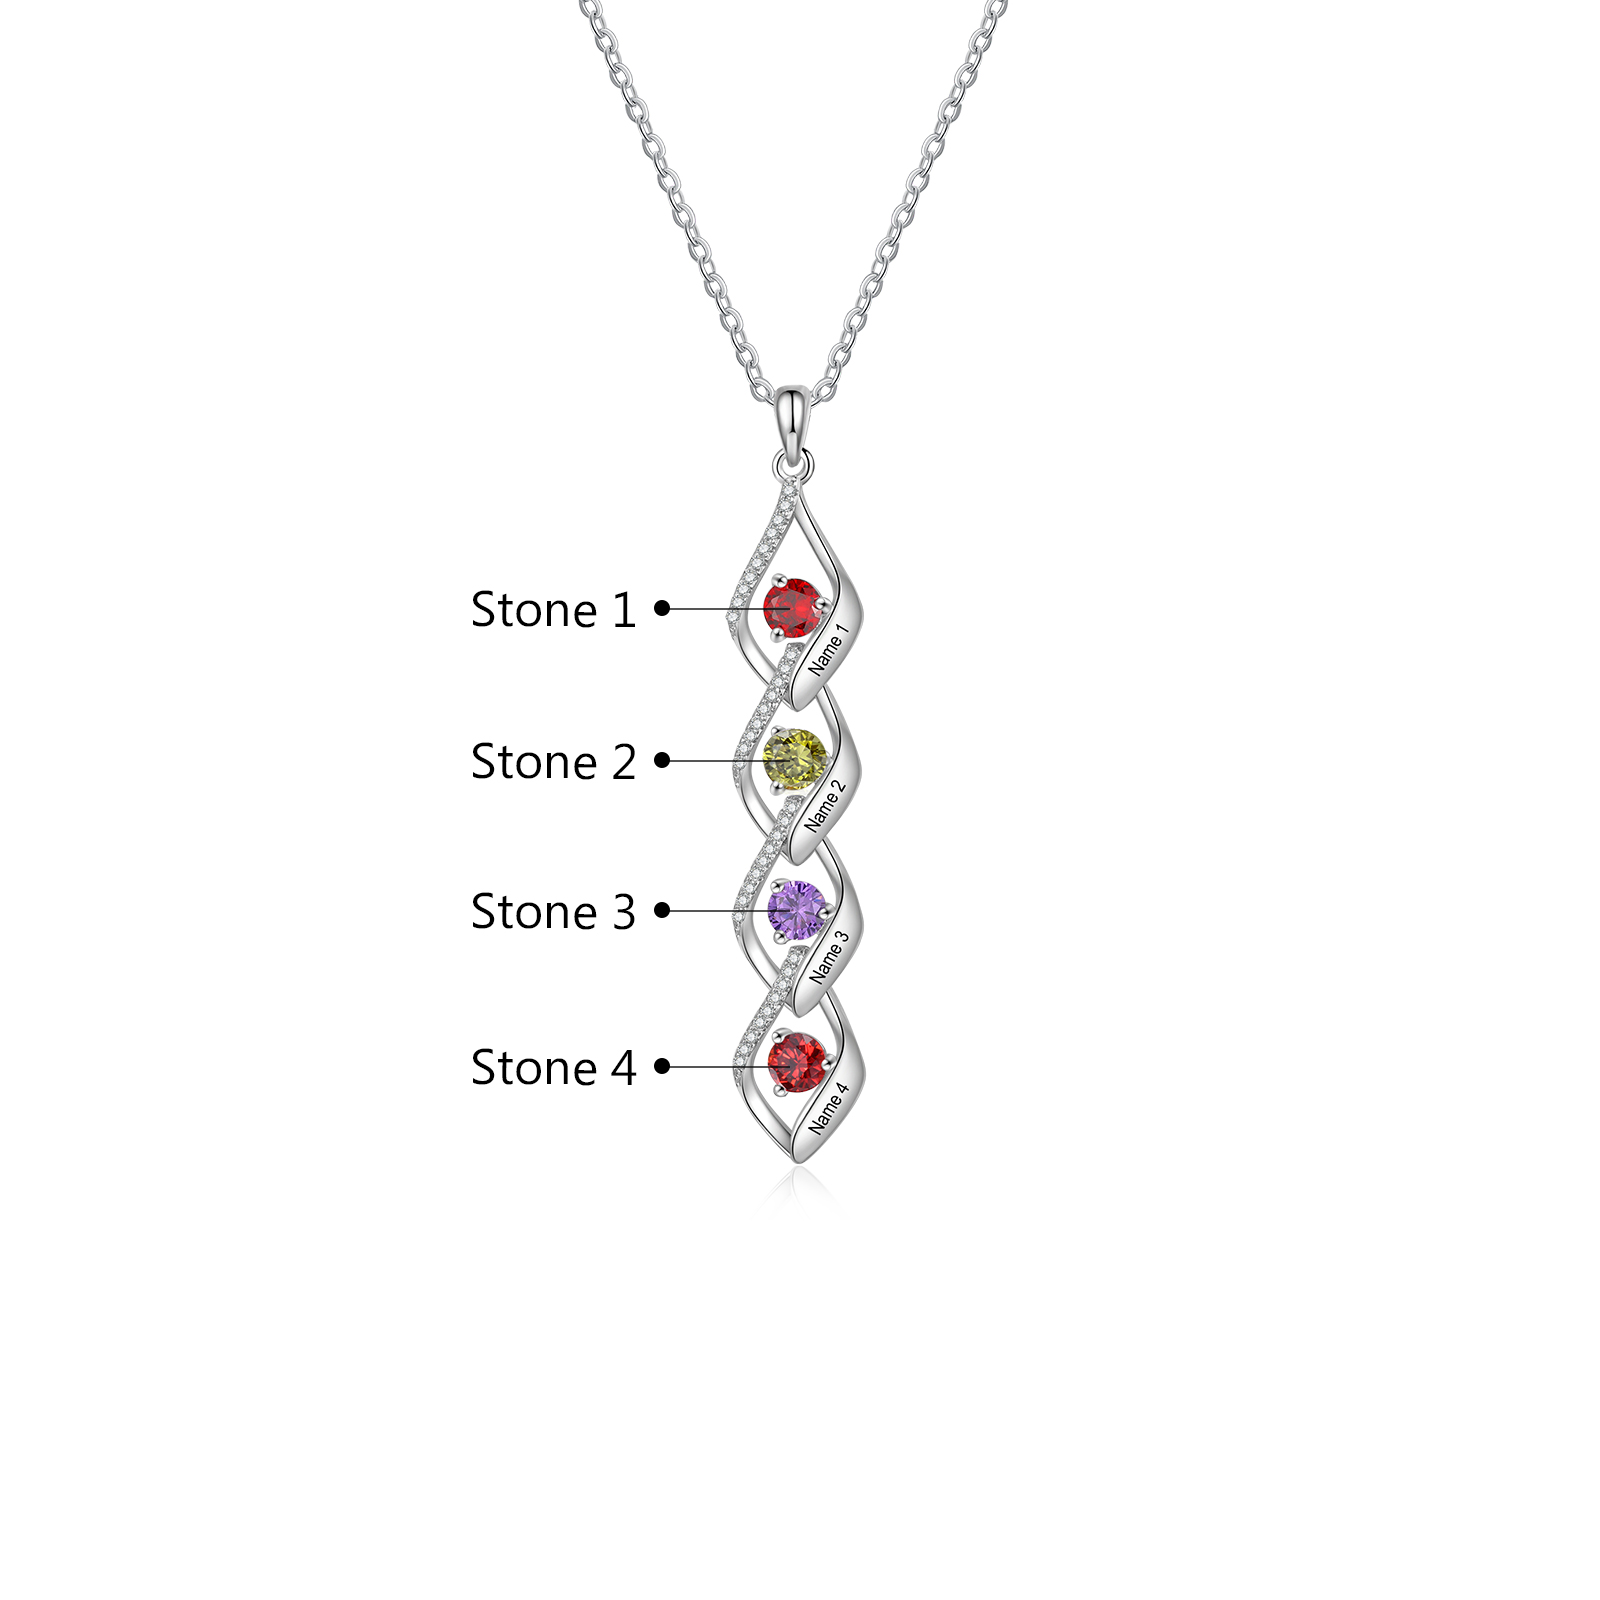 4 Names - Personalized Necklace Custom Birthstone Necklace Engraved with Name A special Gift For Mom/Grandma